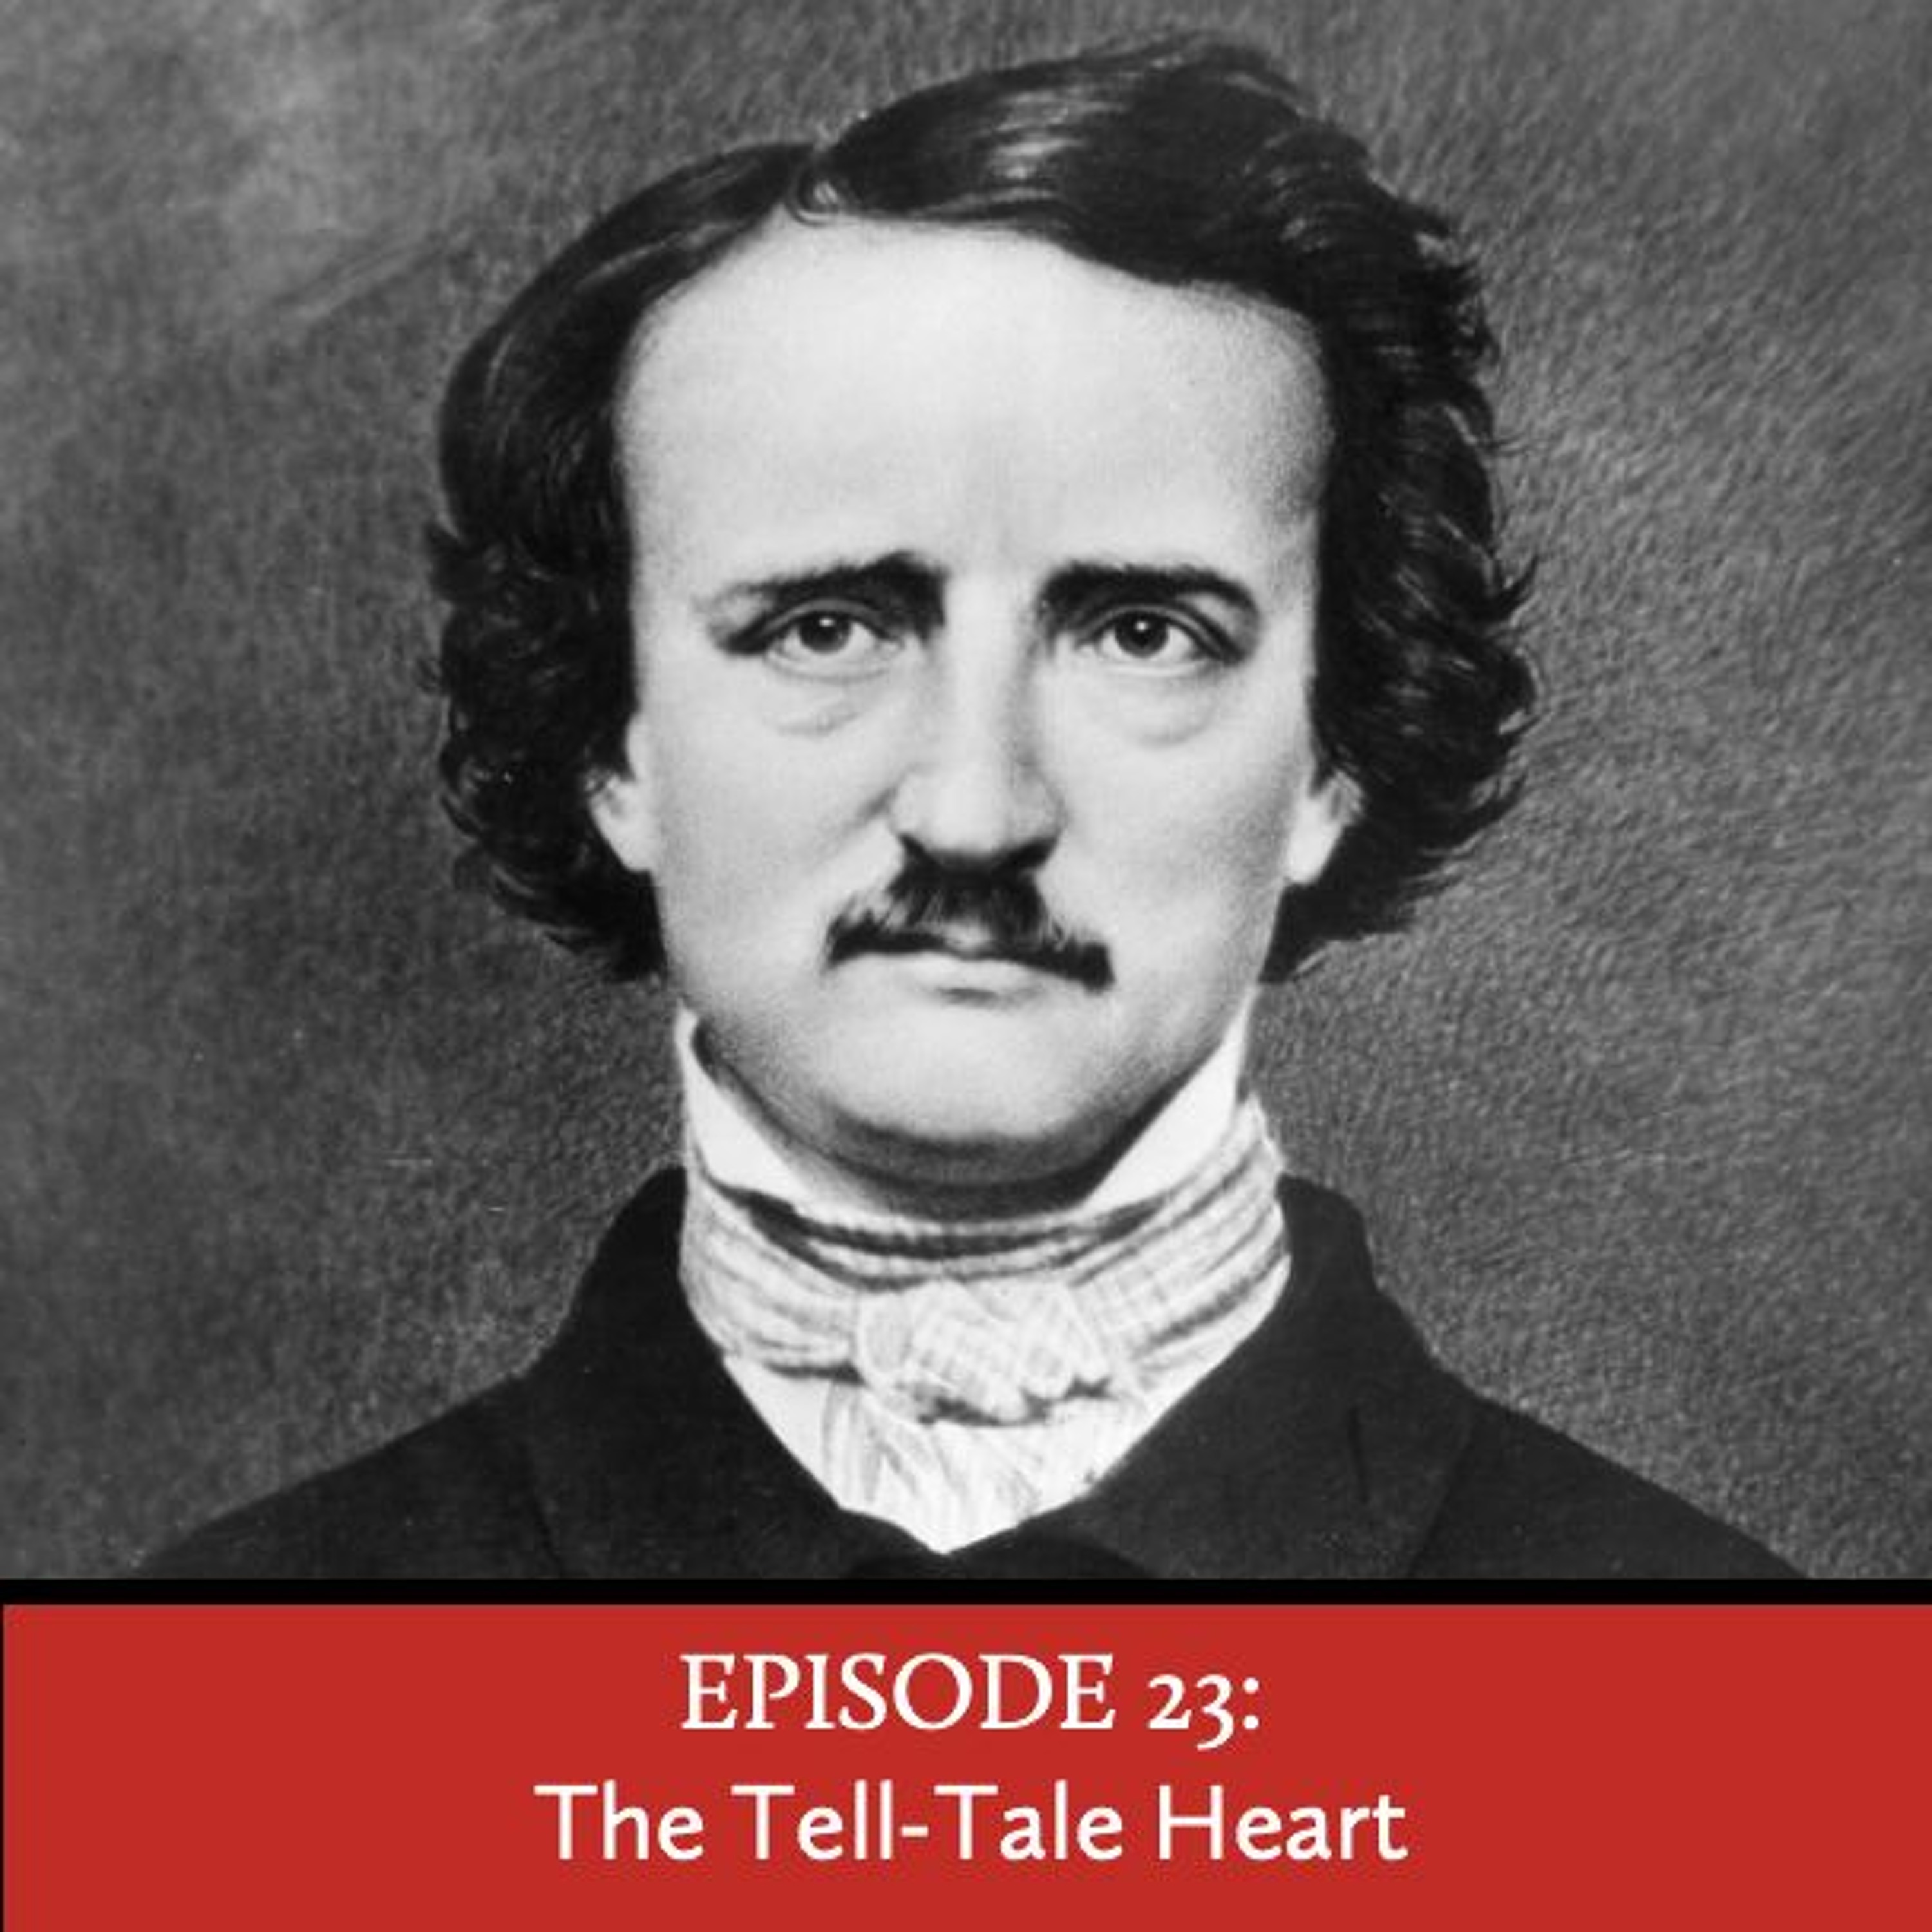 Episode 23: The Tell-Tale Heart